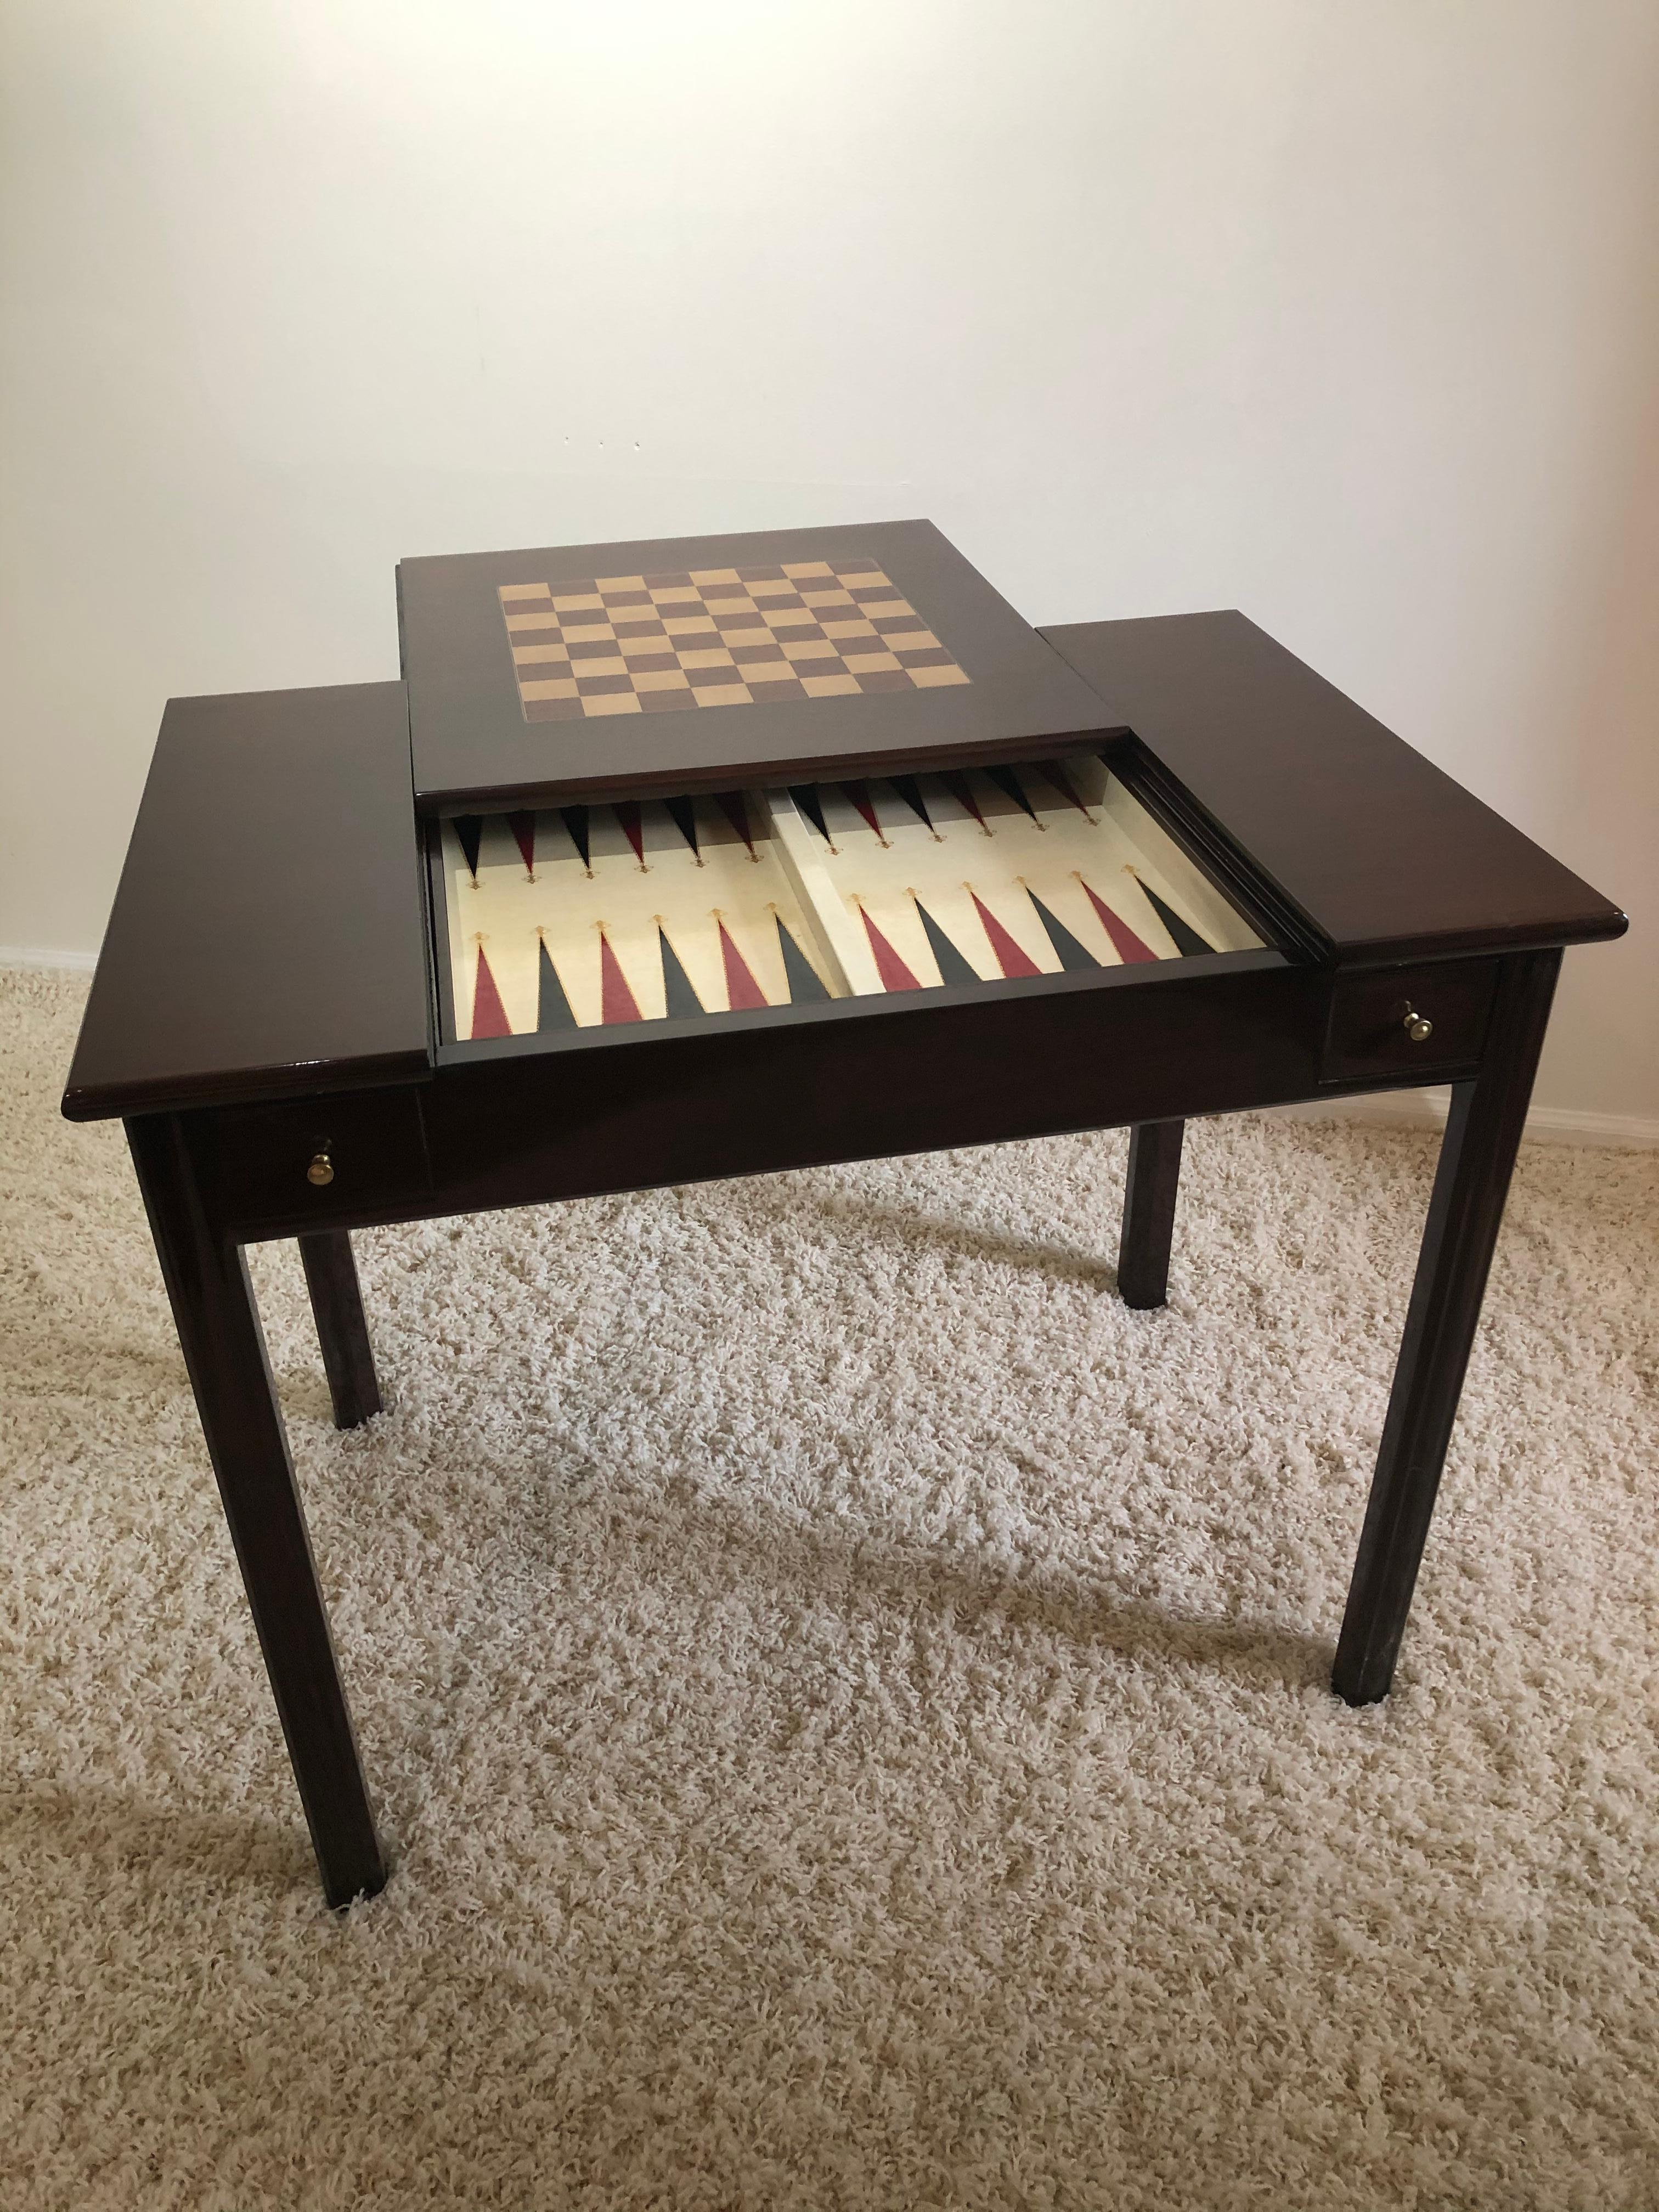 Vintage small scale mahogany Backgammon, chess checkers two sided top two-drawer game table, backgammon tray can be lifted out of wanted, two long drawers, and two fake front, brass knobs. Leather lined board. Classic design goes well with Art Deco